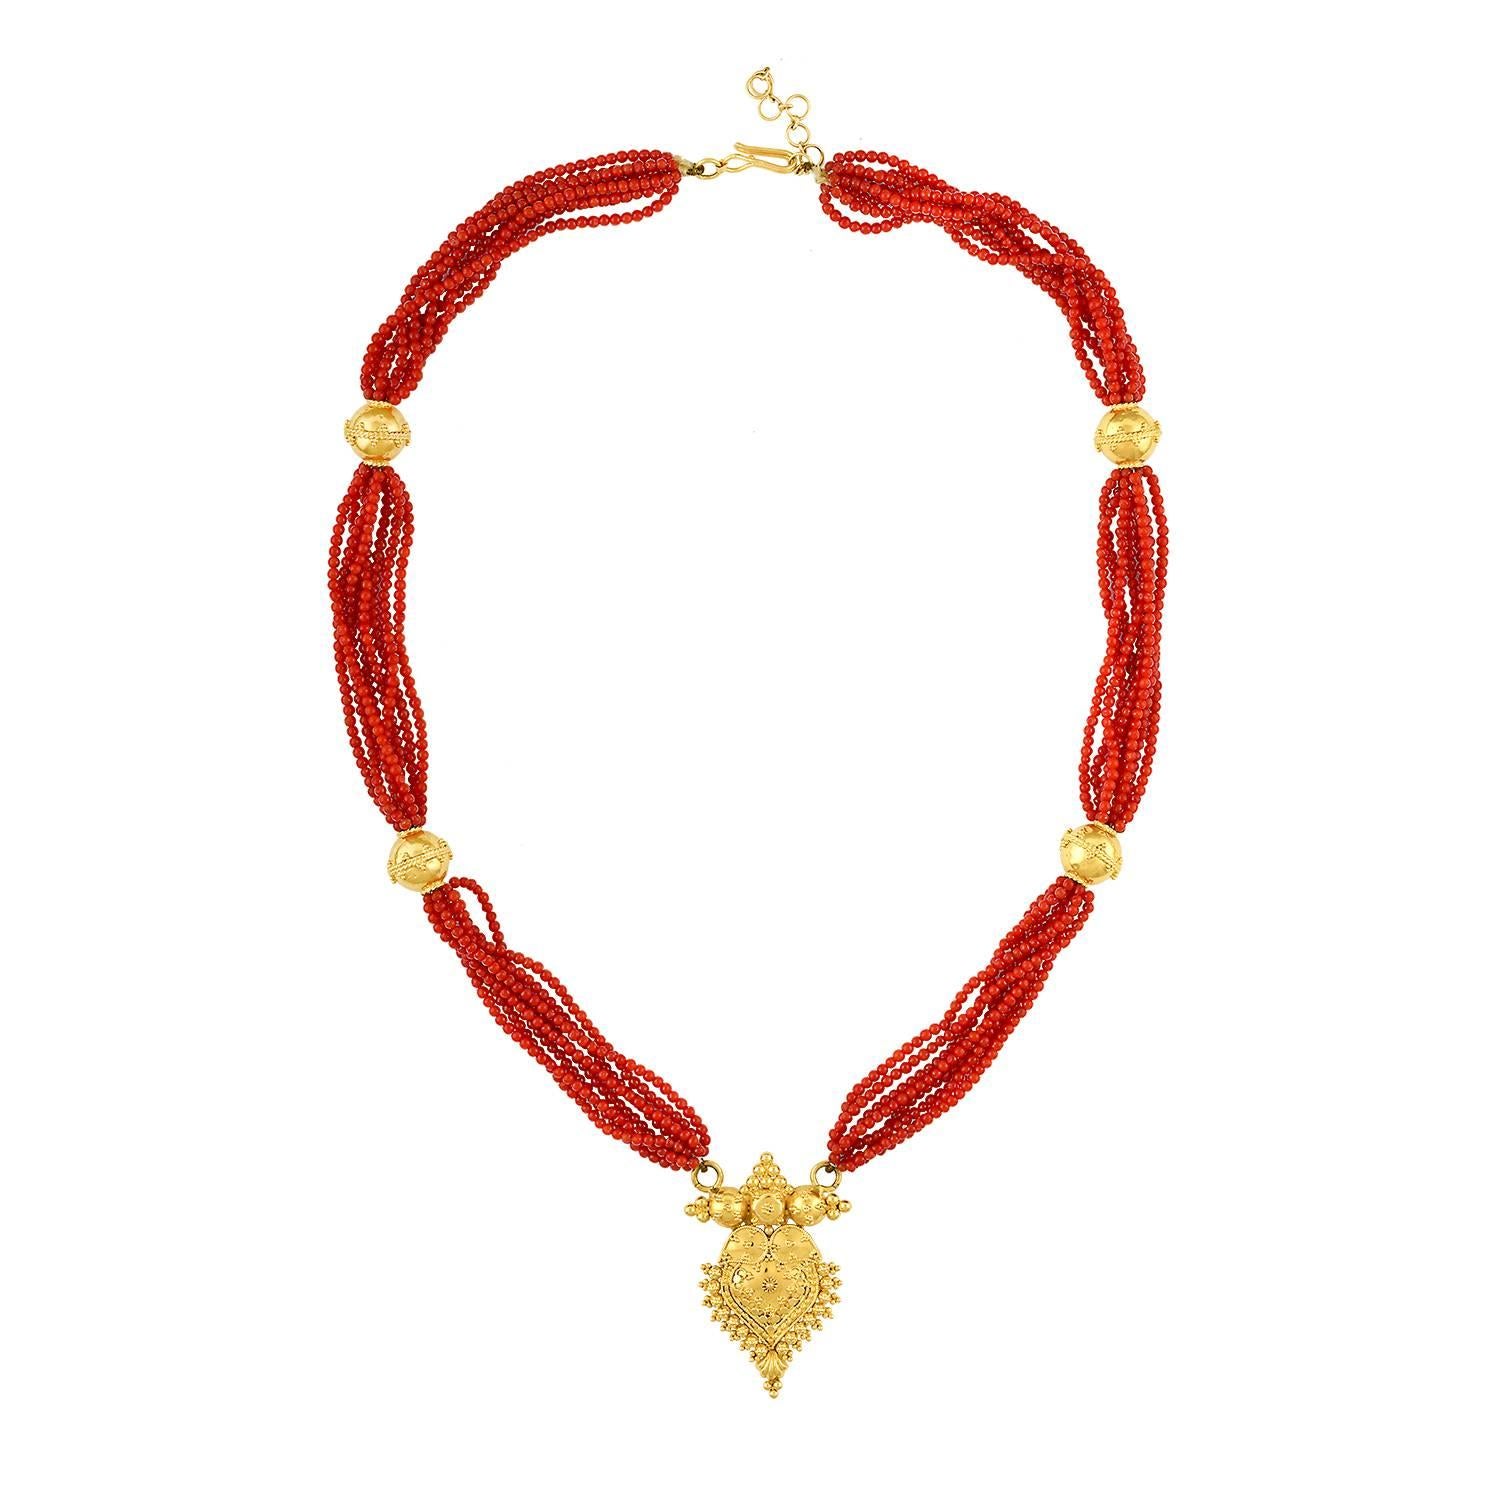 Estate 14K Gold Triple Strand Natural Coral Bead Necklace with